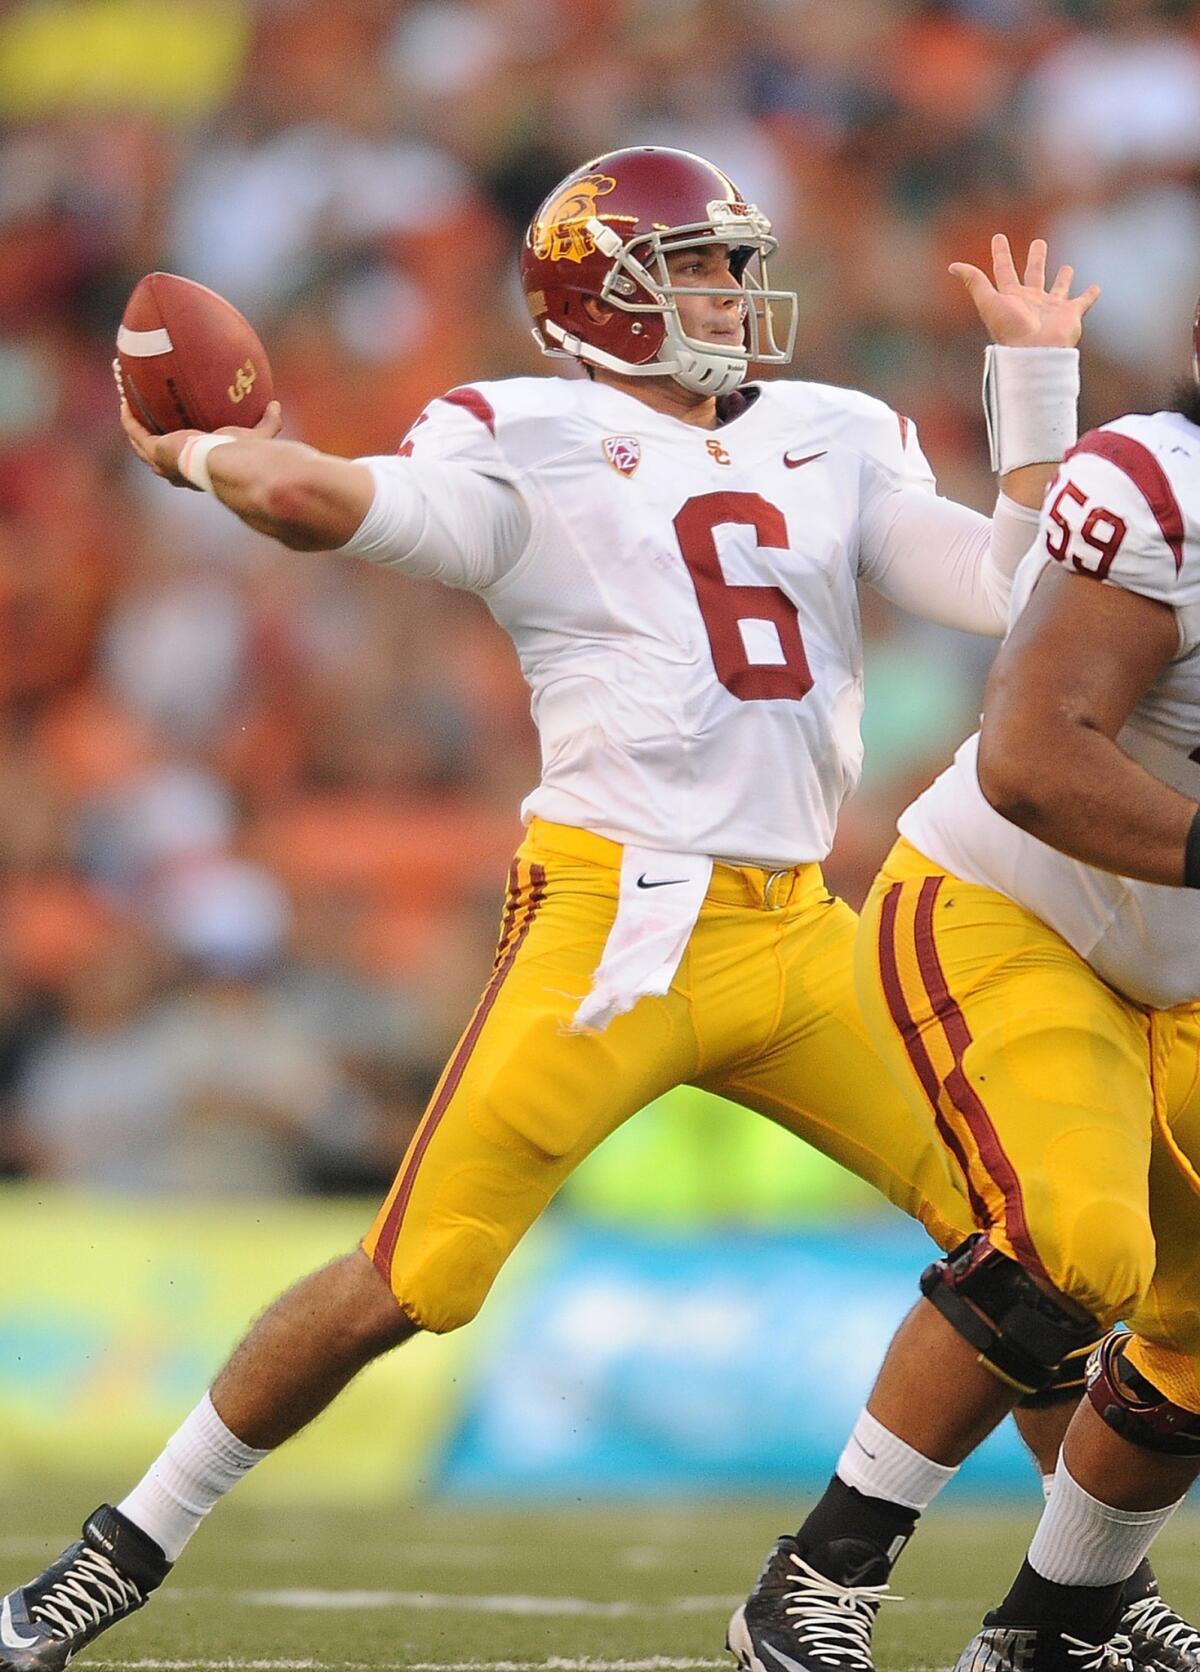 USC quarterback Cody Kessler might start again for the Trojans when they play host to Washington State on Saturday.